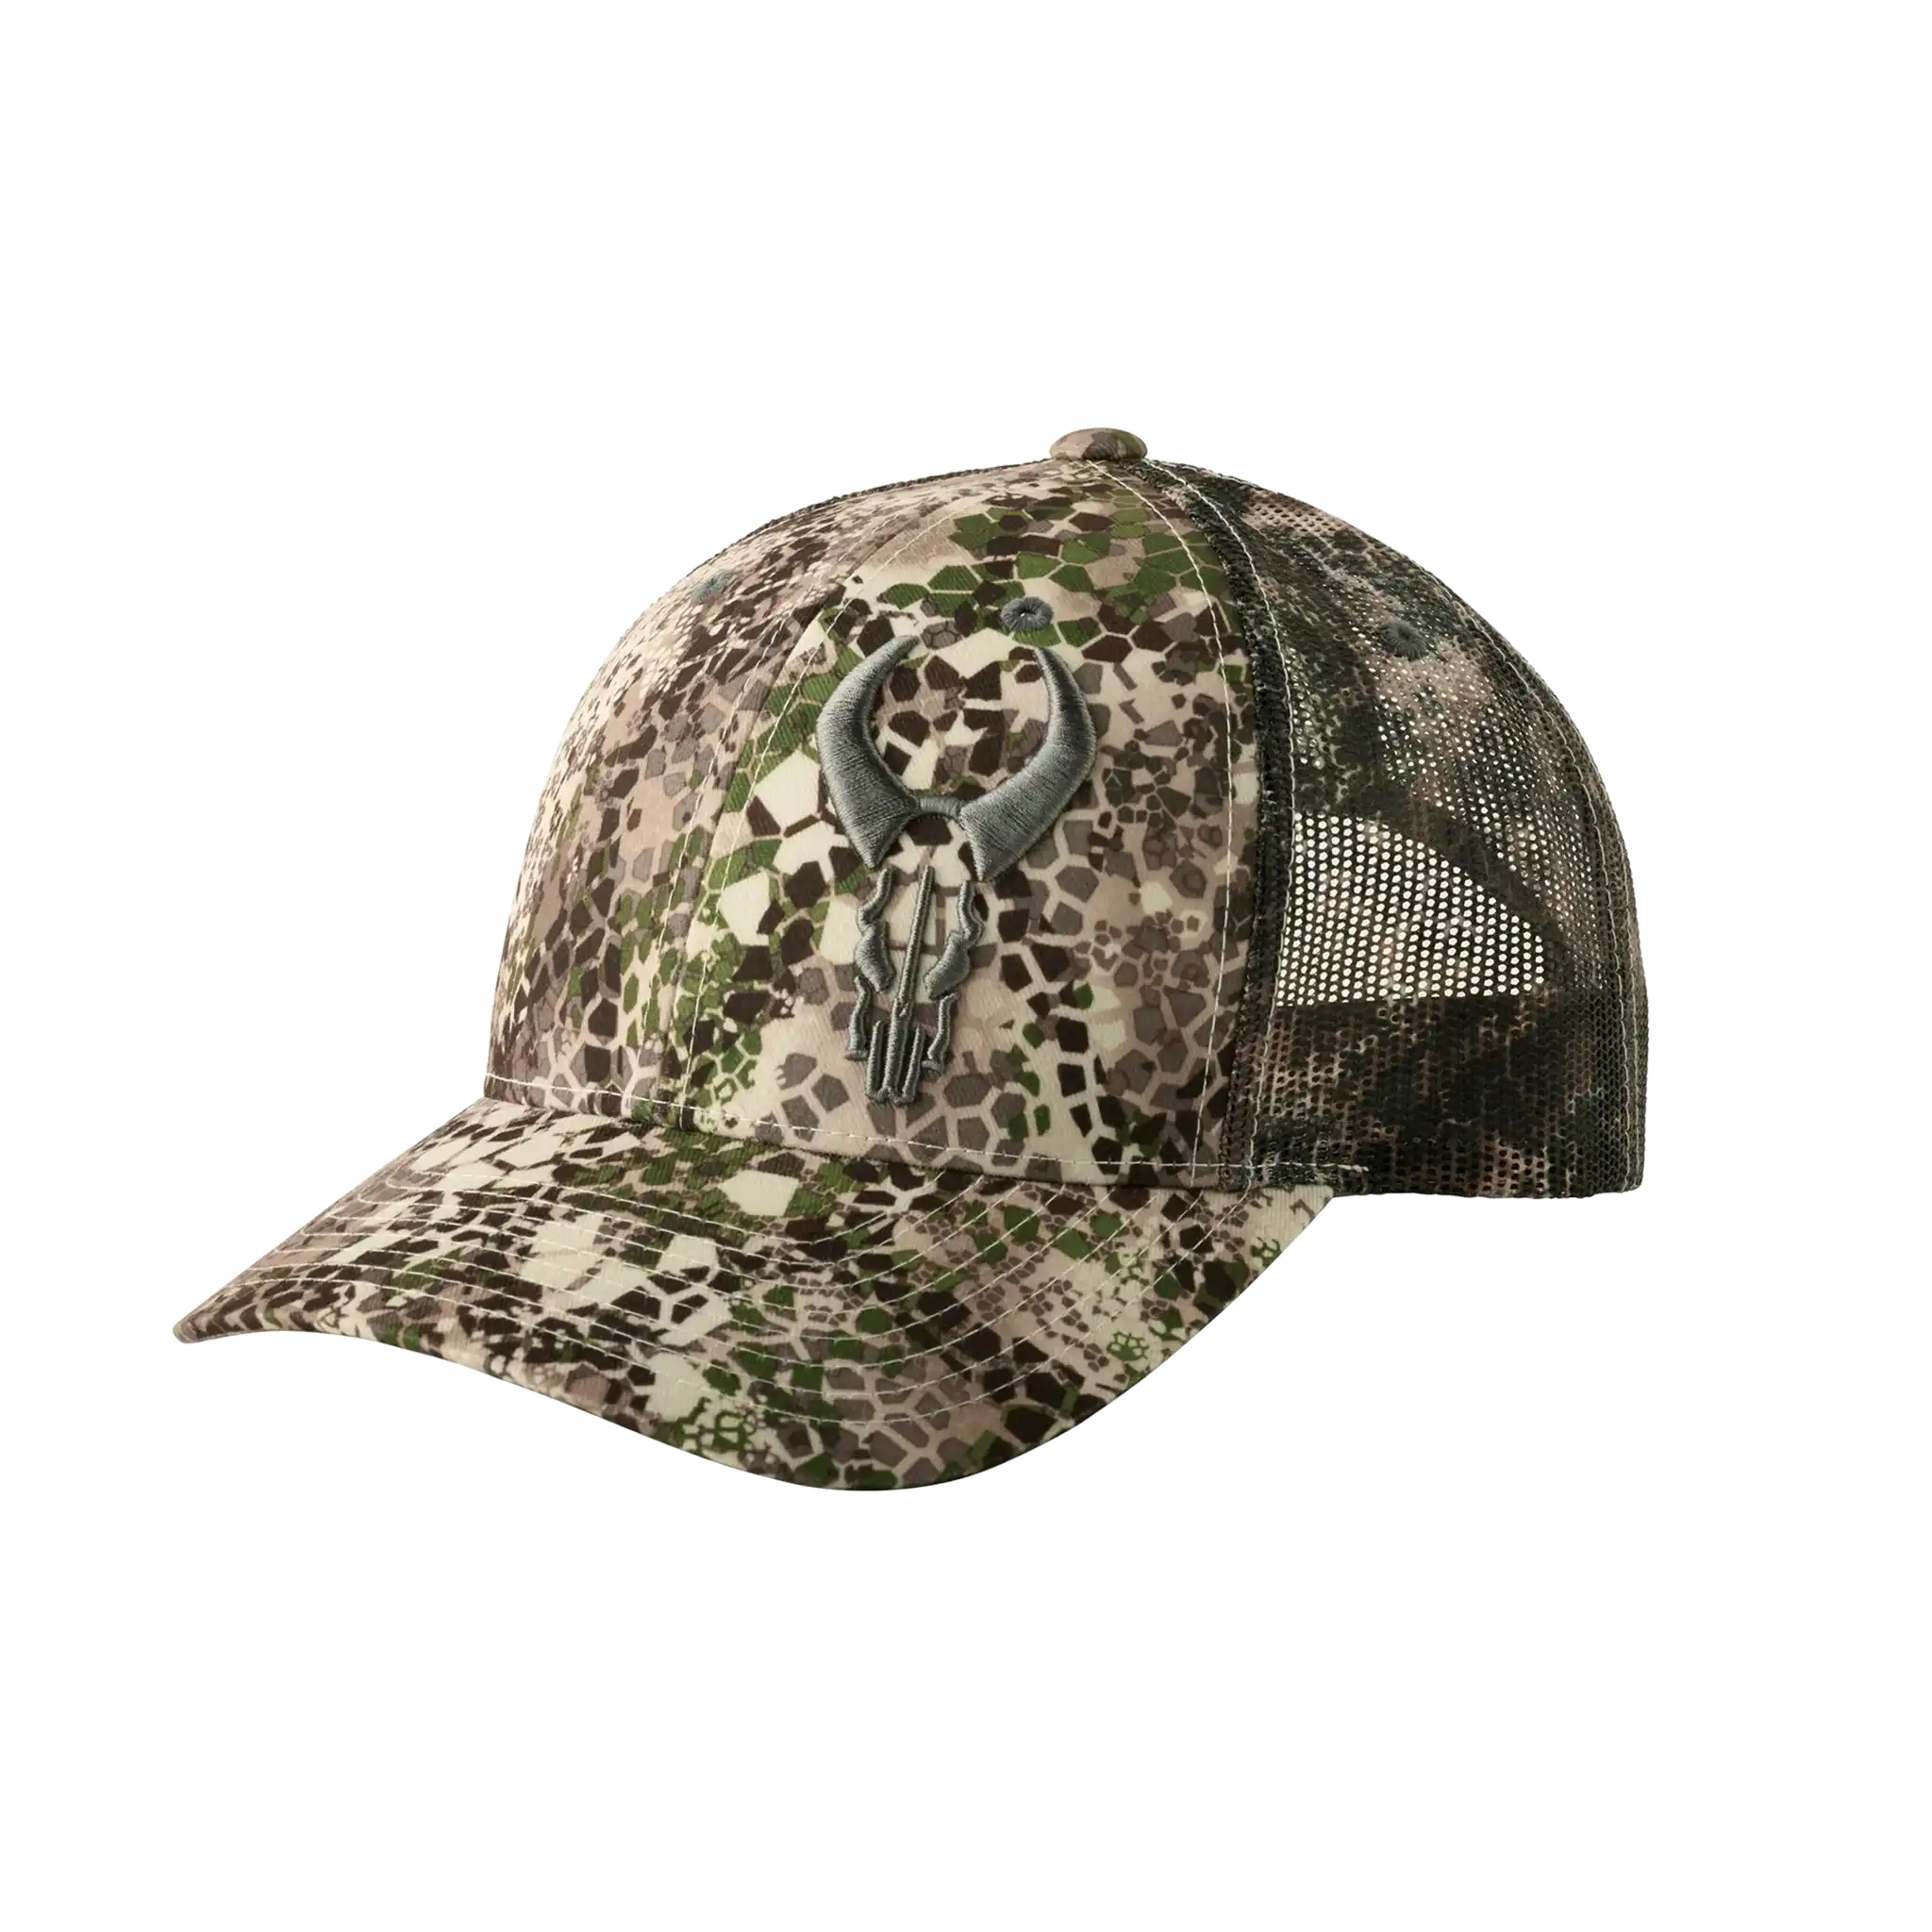 Bass Patch Trucker Woodland Camo Flame Hat – The Duck Blind